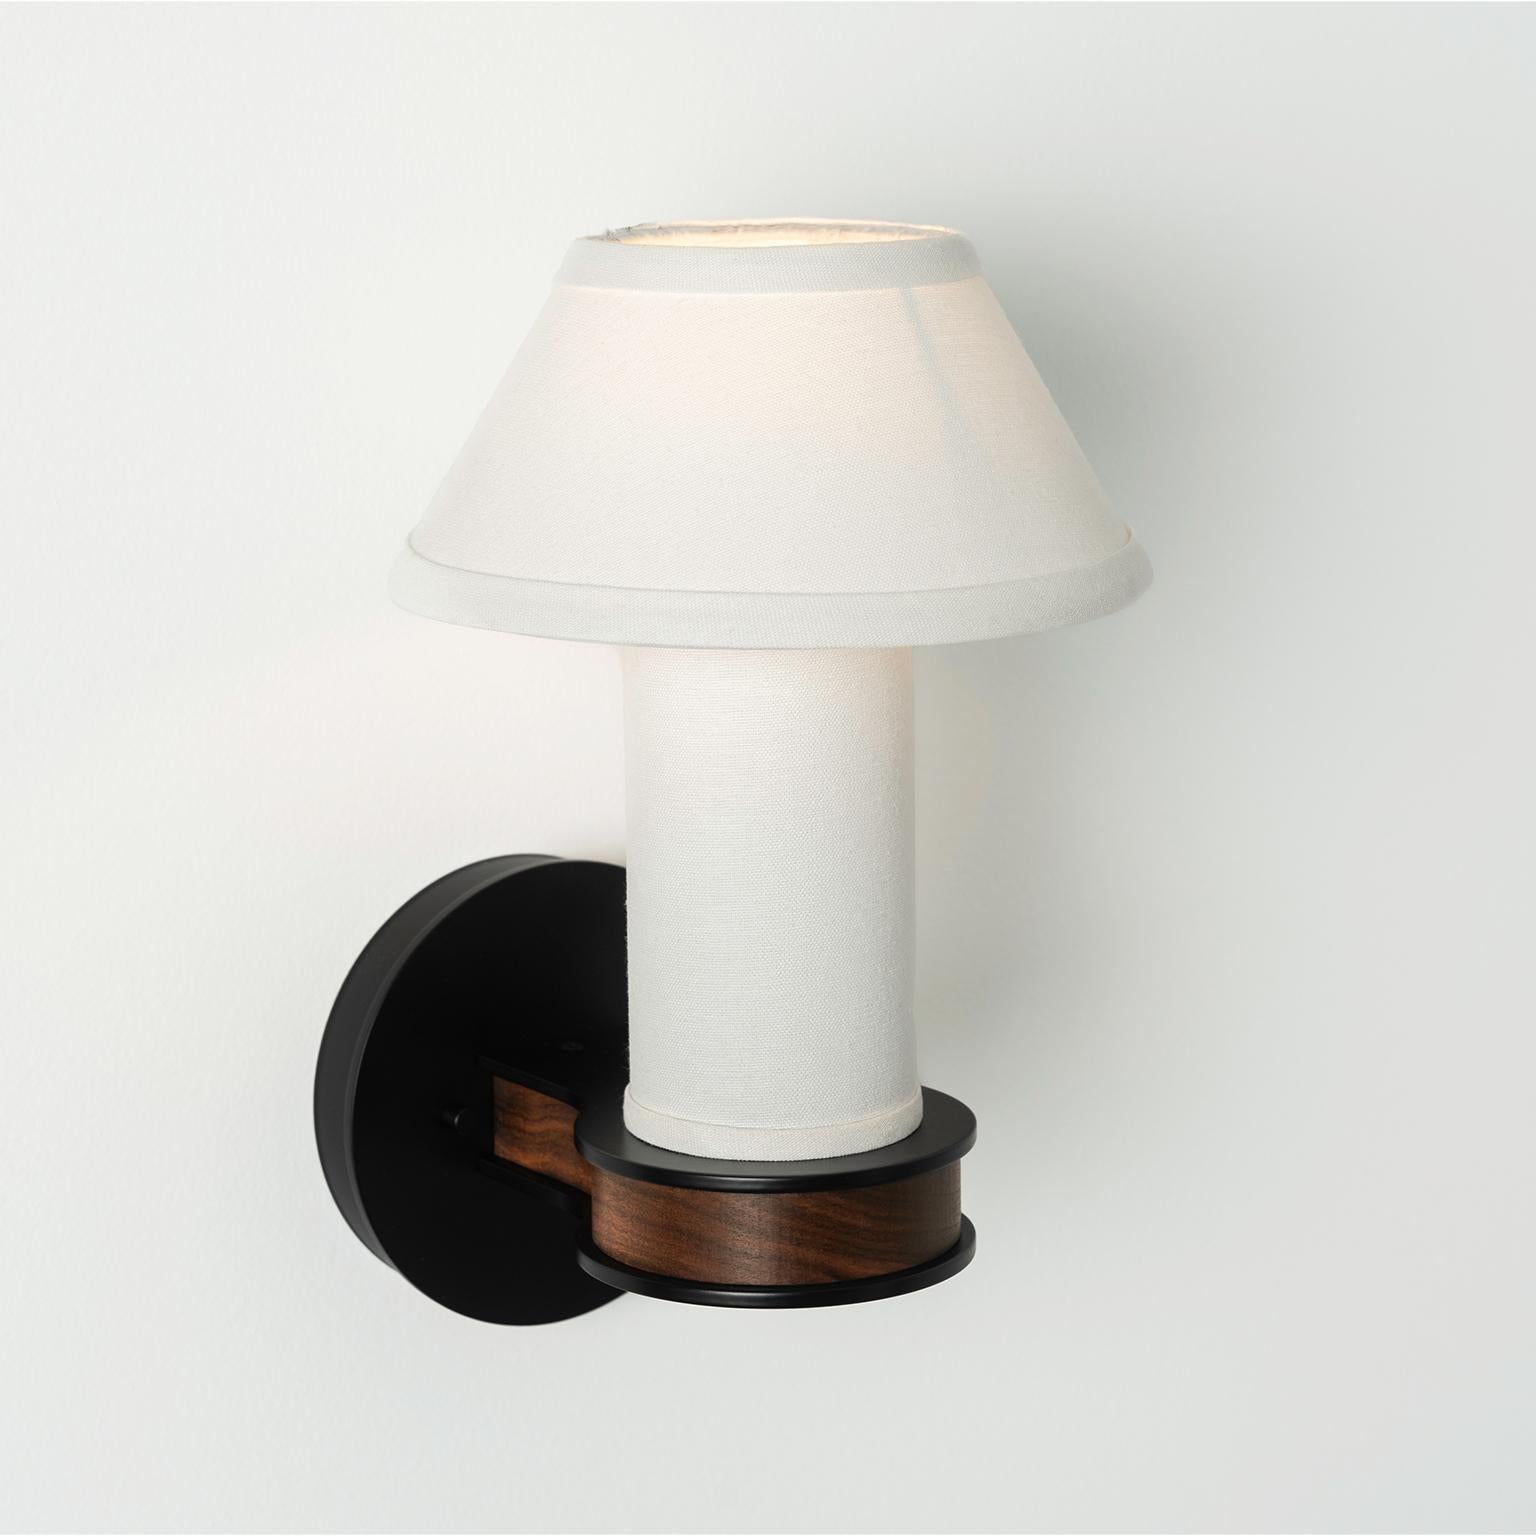 Pillaret Rise Sconce by Studio DUNN In New Condition For Sale In Rumford, RI